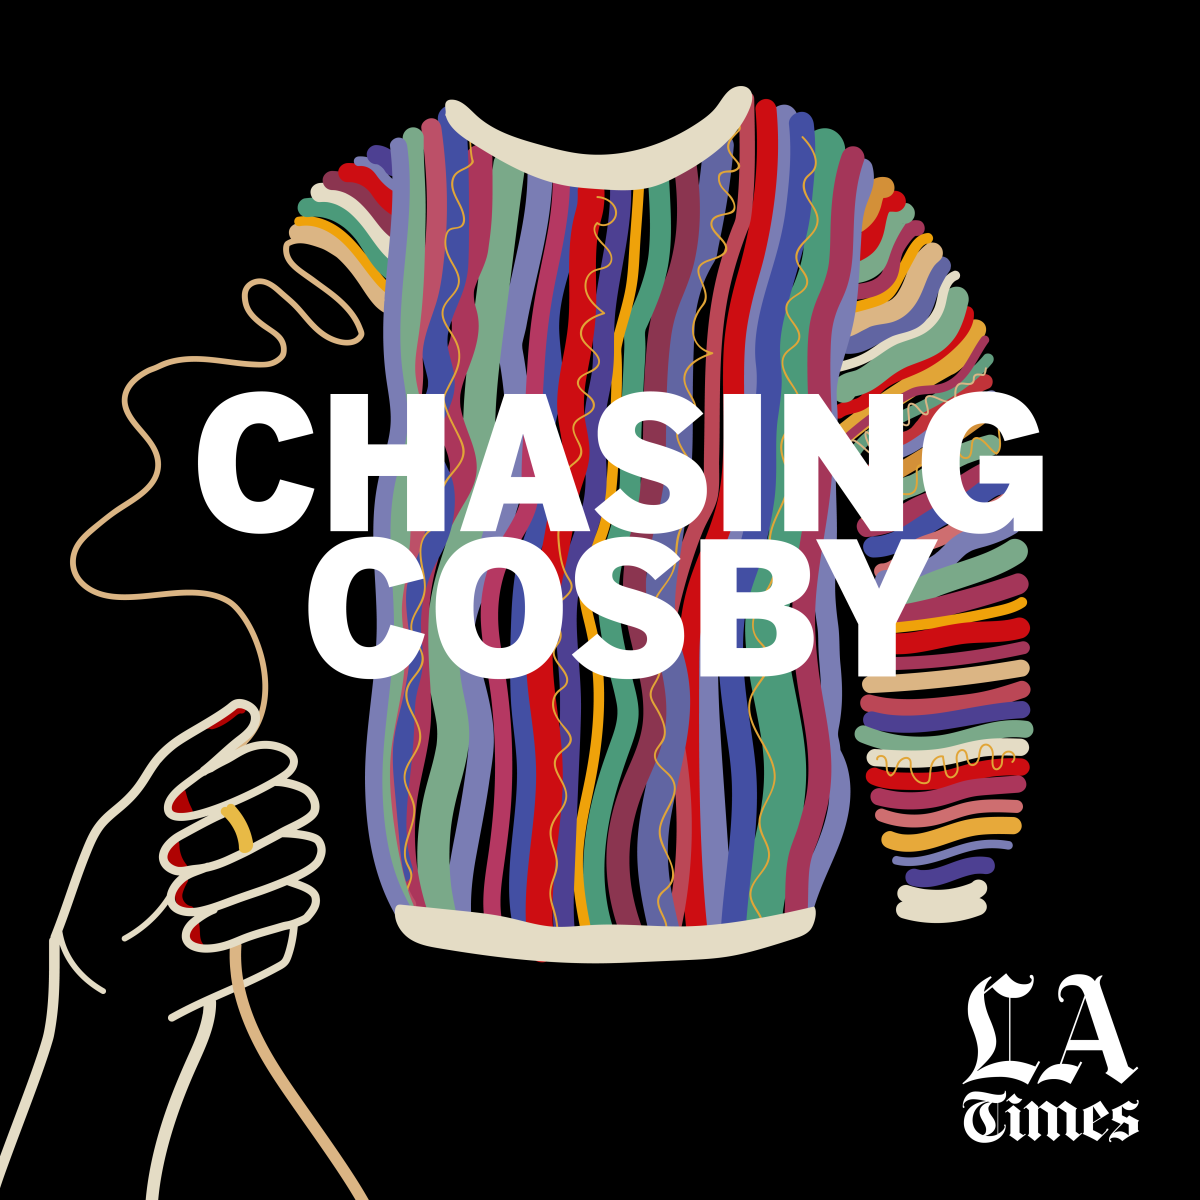 L.A. Times 'Chasing Cosby'